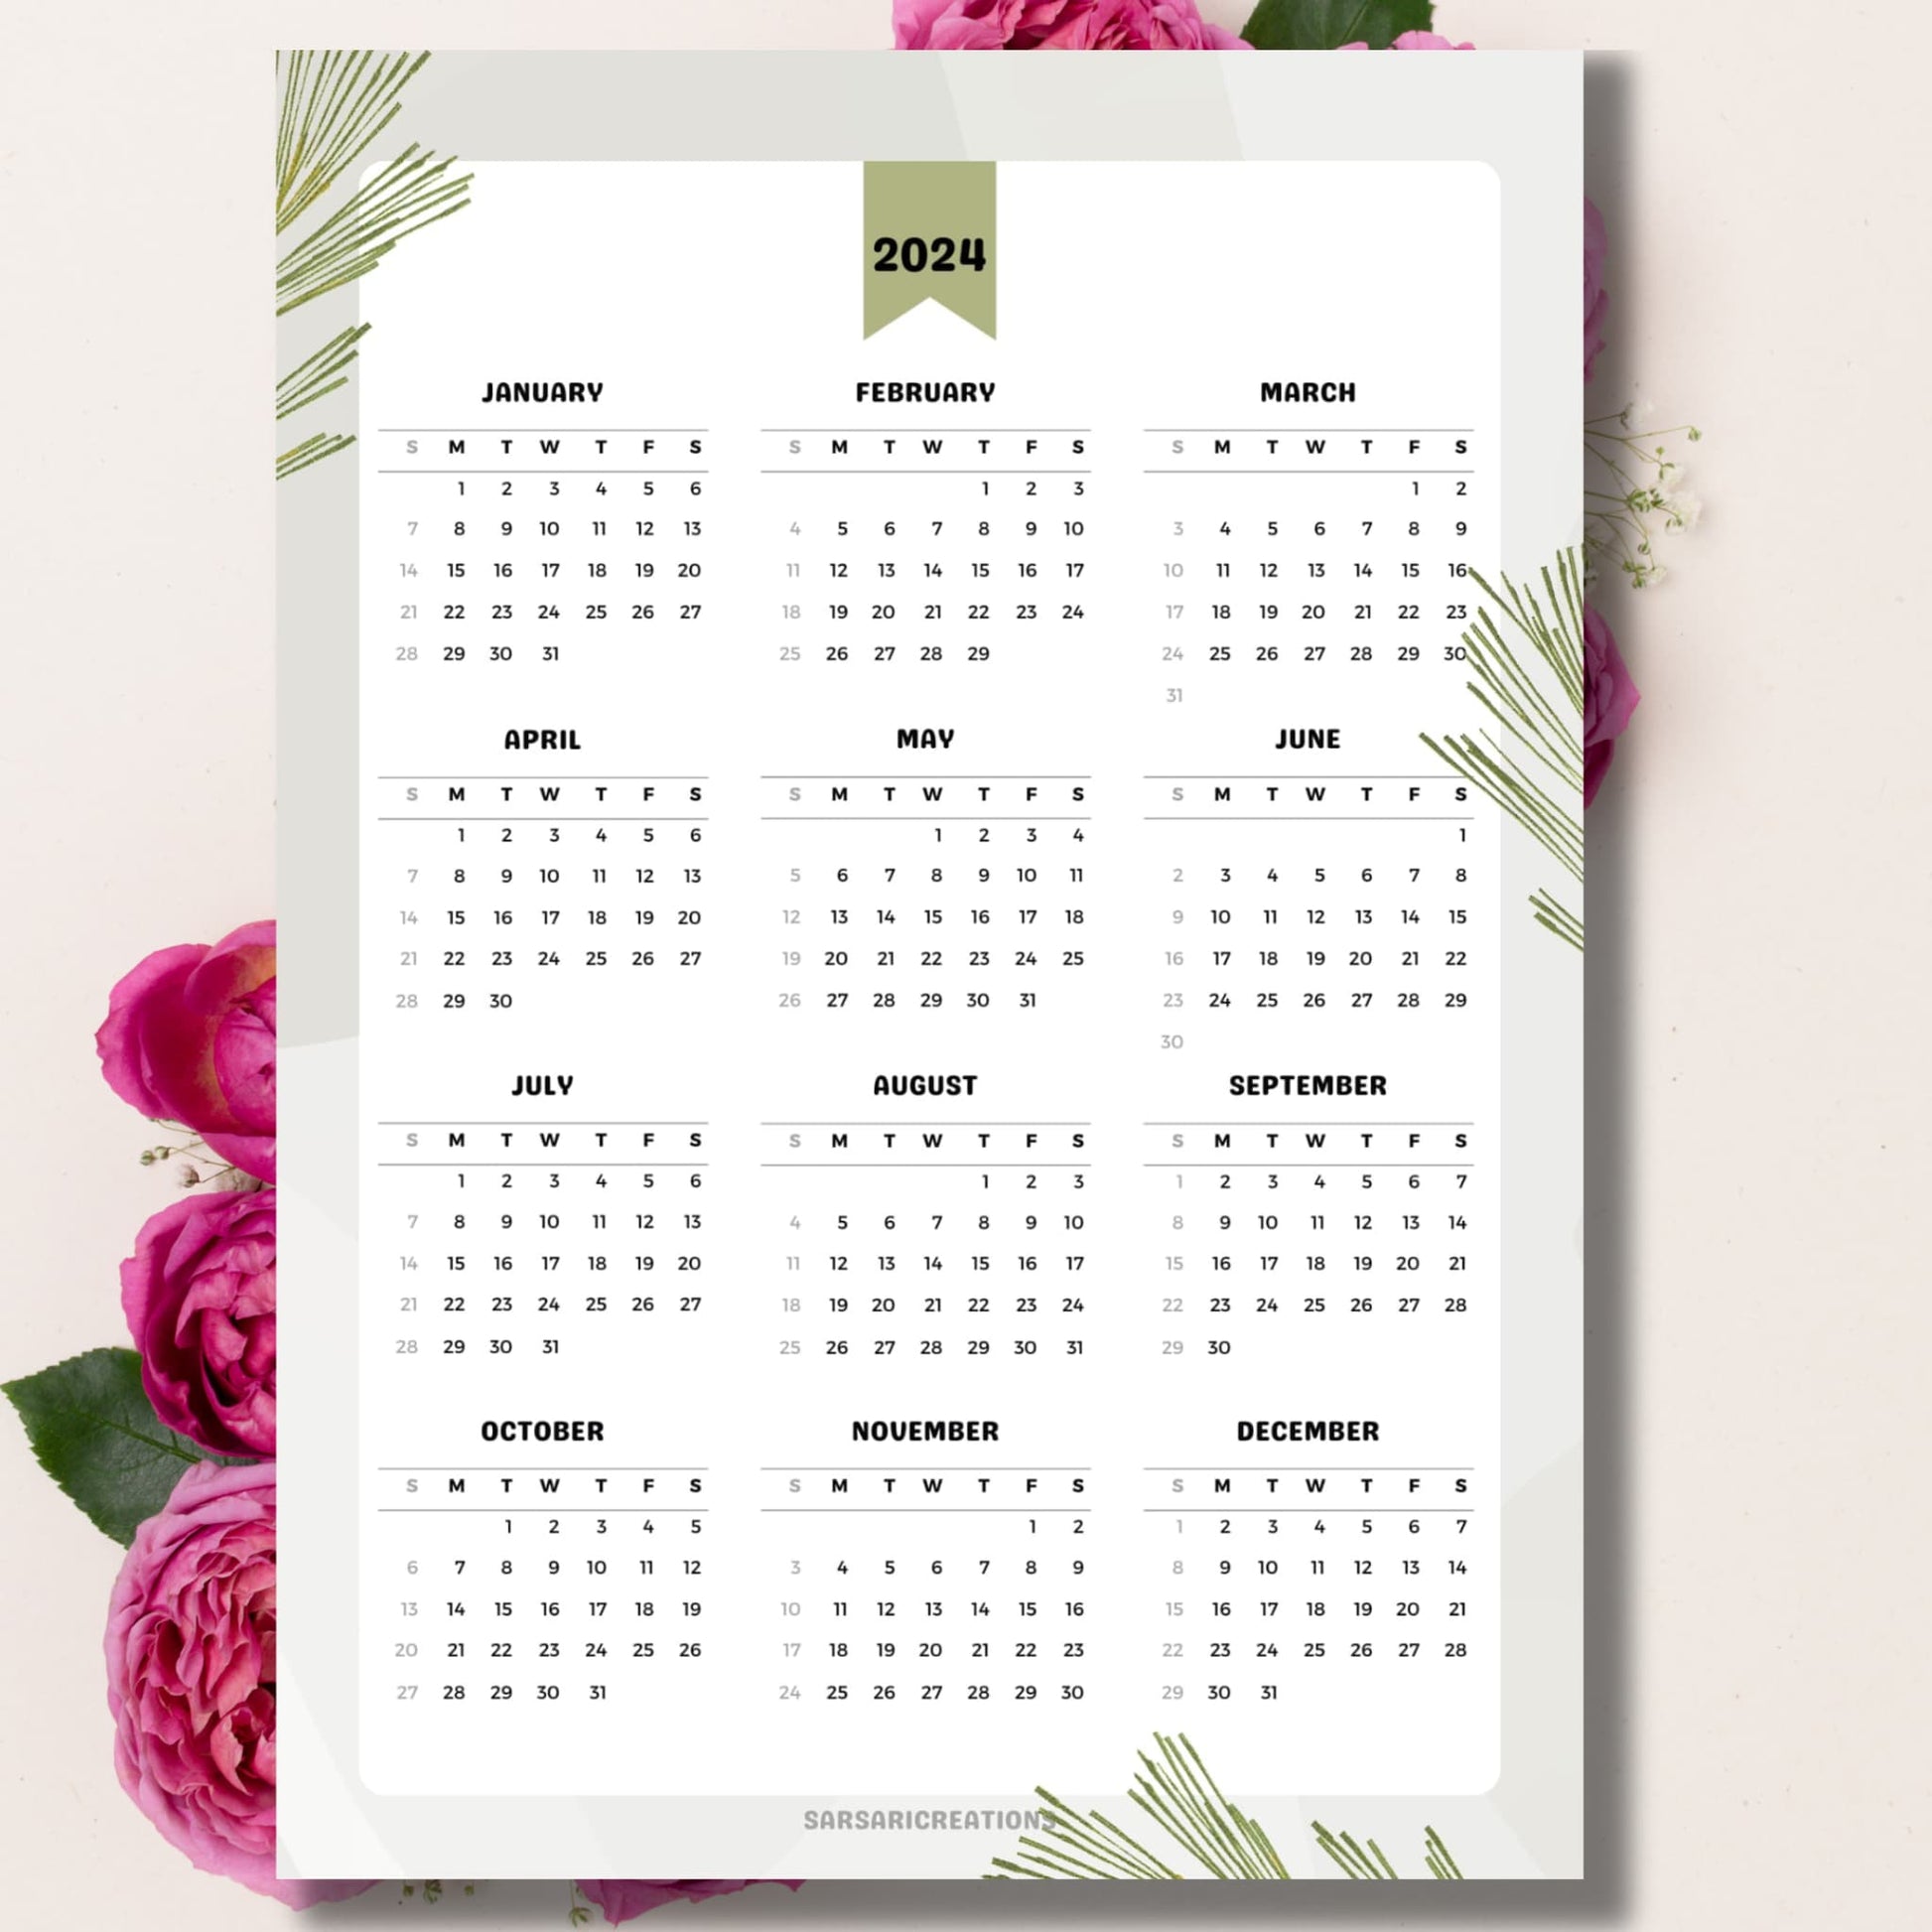 Nature-themed 2024 calendar on beige background with pink peonies.